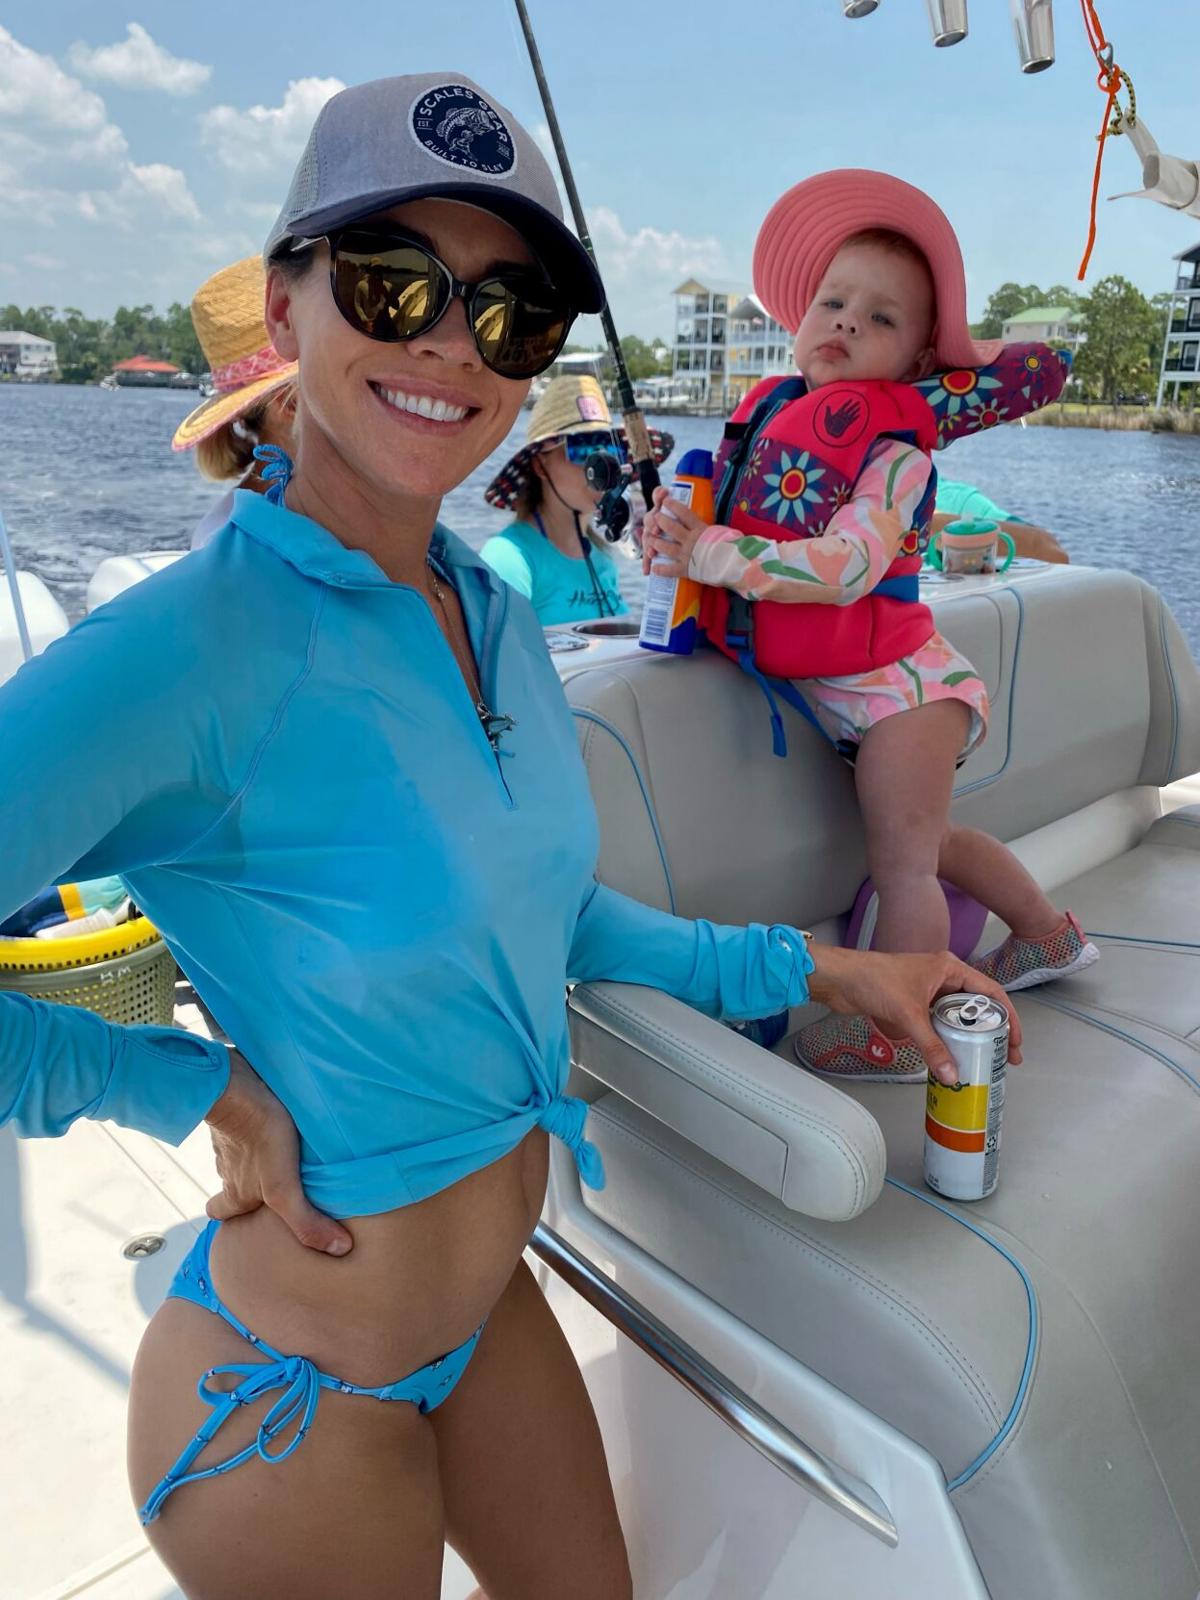 Kid's Boat Life, Boat Gear and Tips for Boating with Kids - Boater